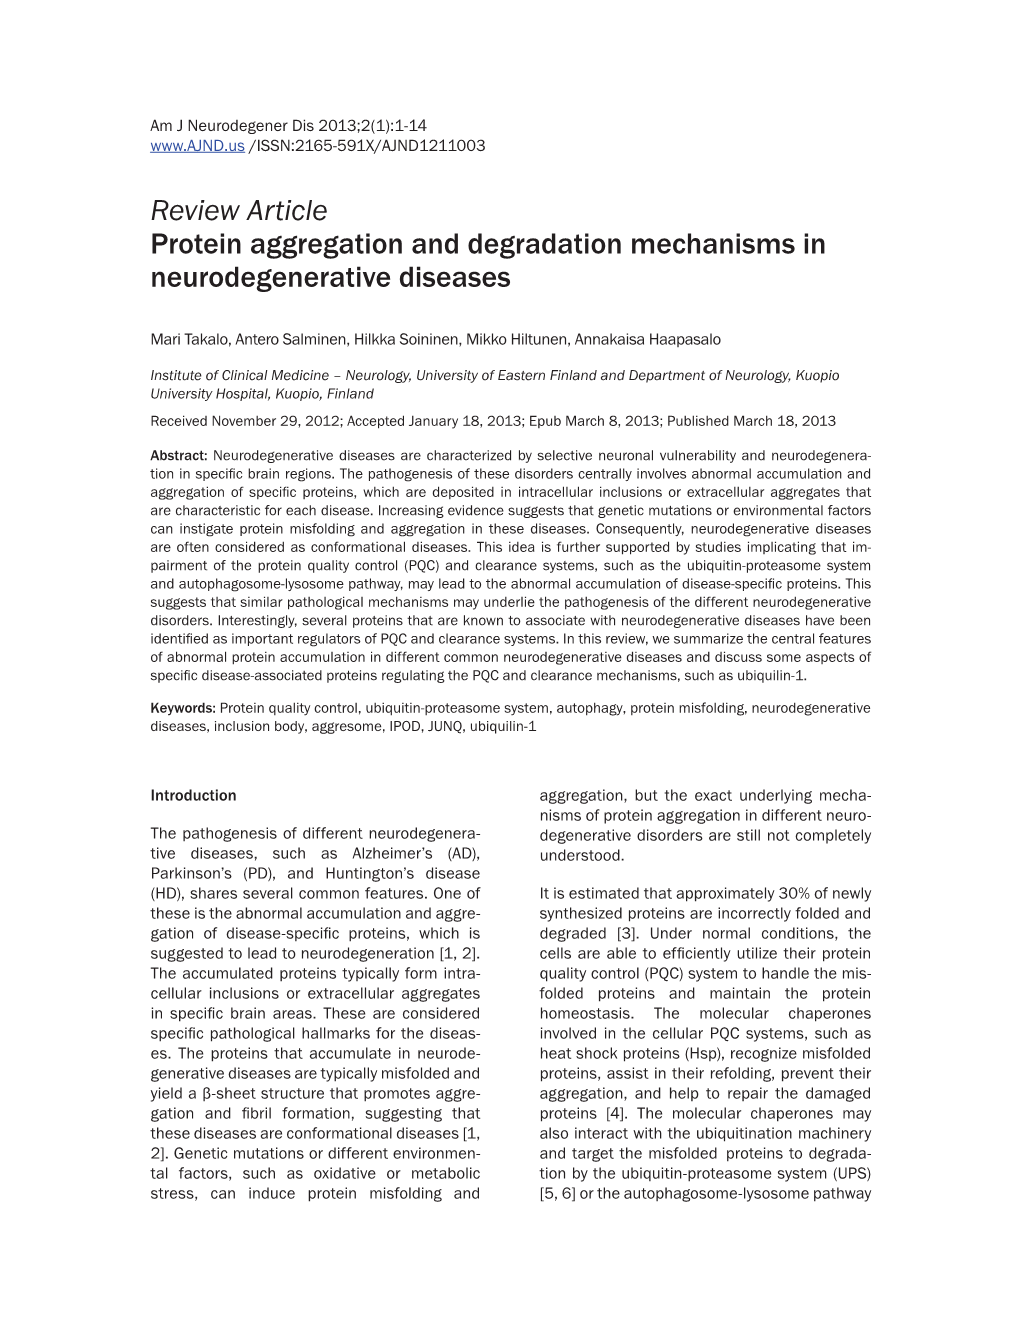 Review Article Protein Aggregation and Degradation Mechanisms in Neurodegenerative Diseases